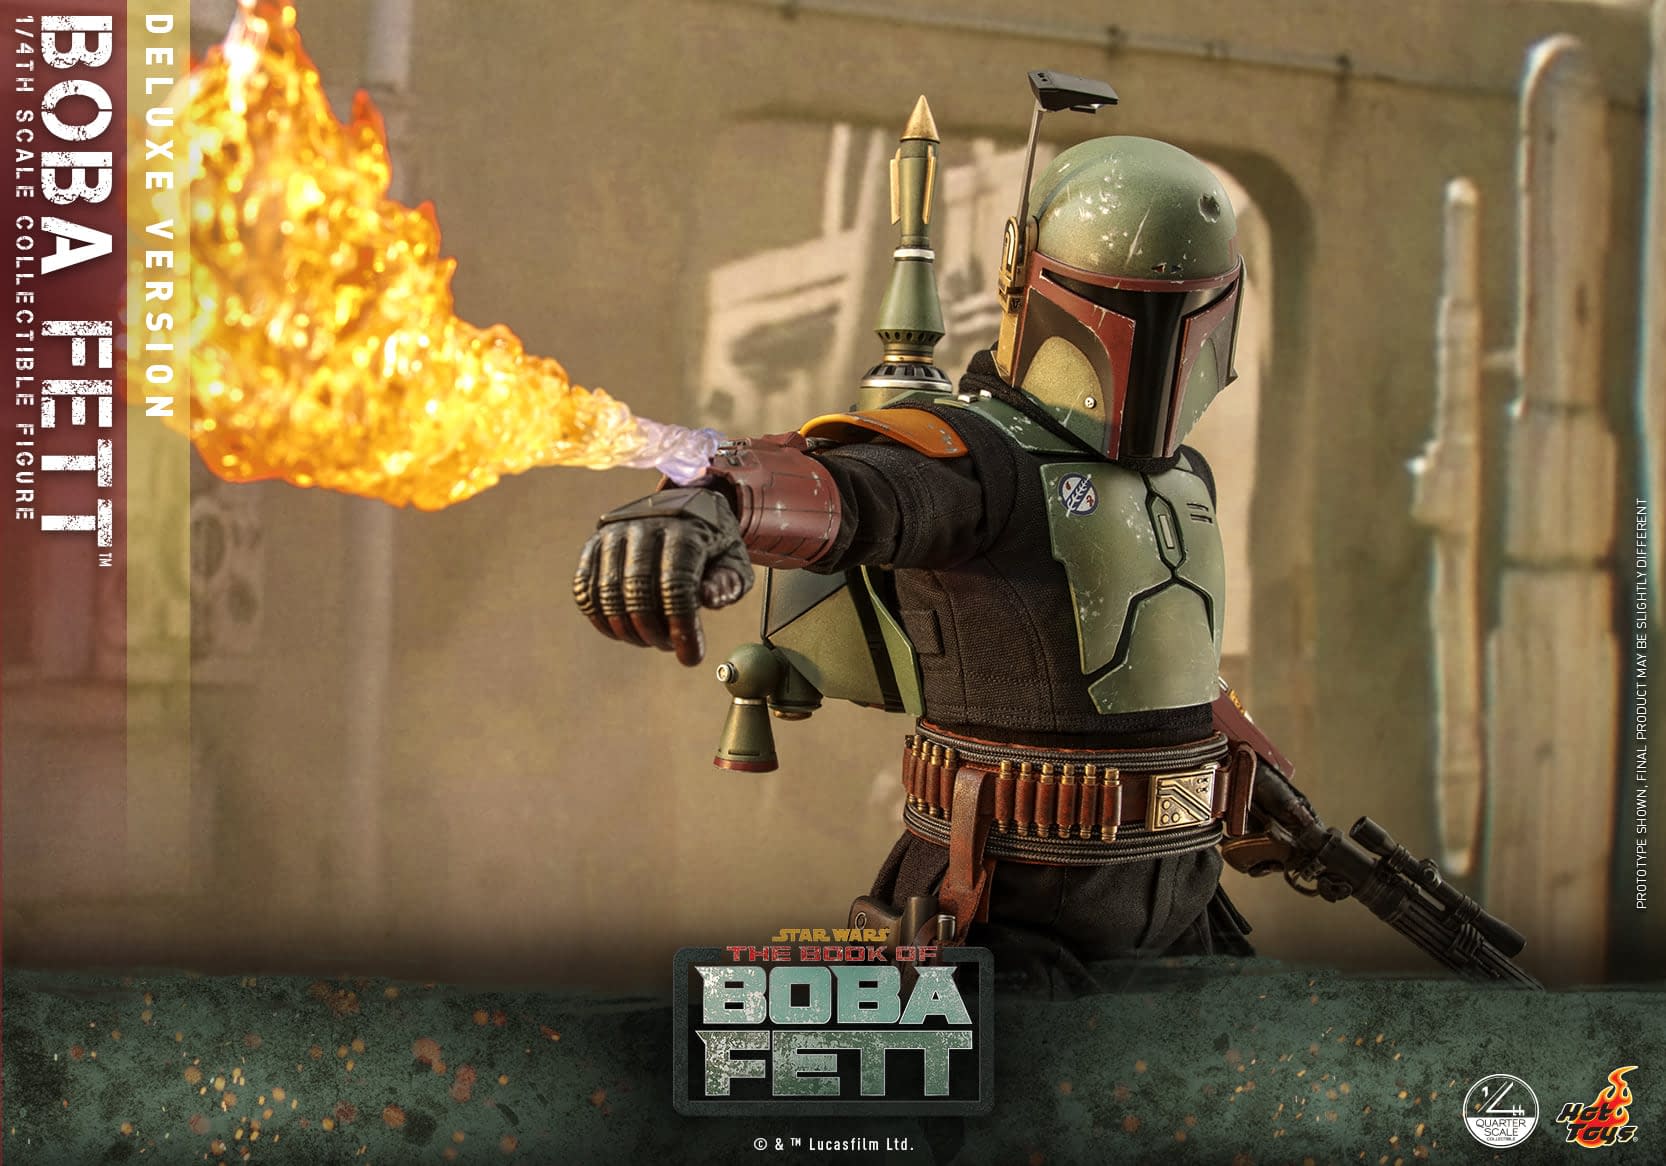 The Book Of Boba Fett Comes To Hot Toys With 1 4 Star Wars Figure